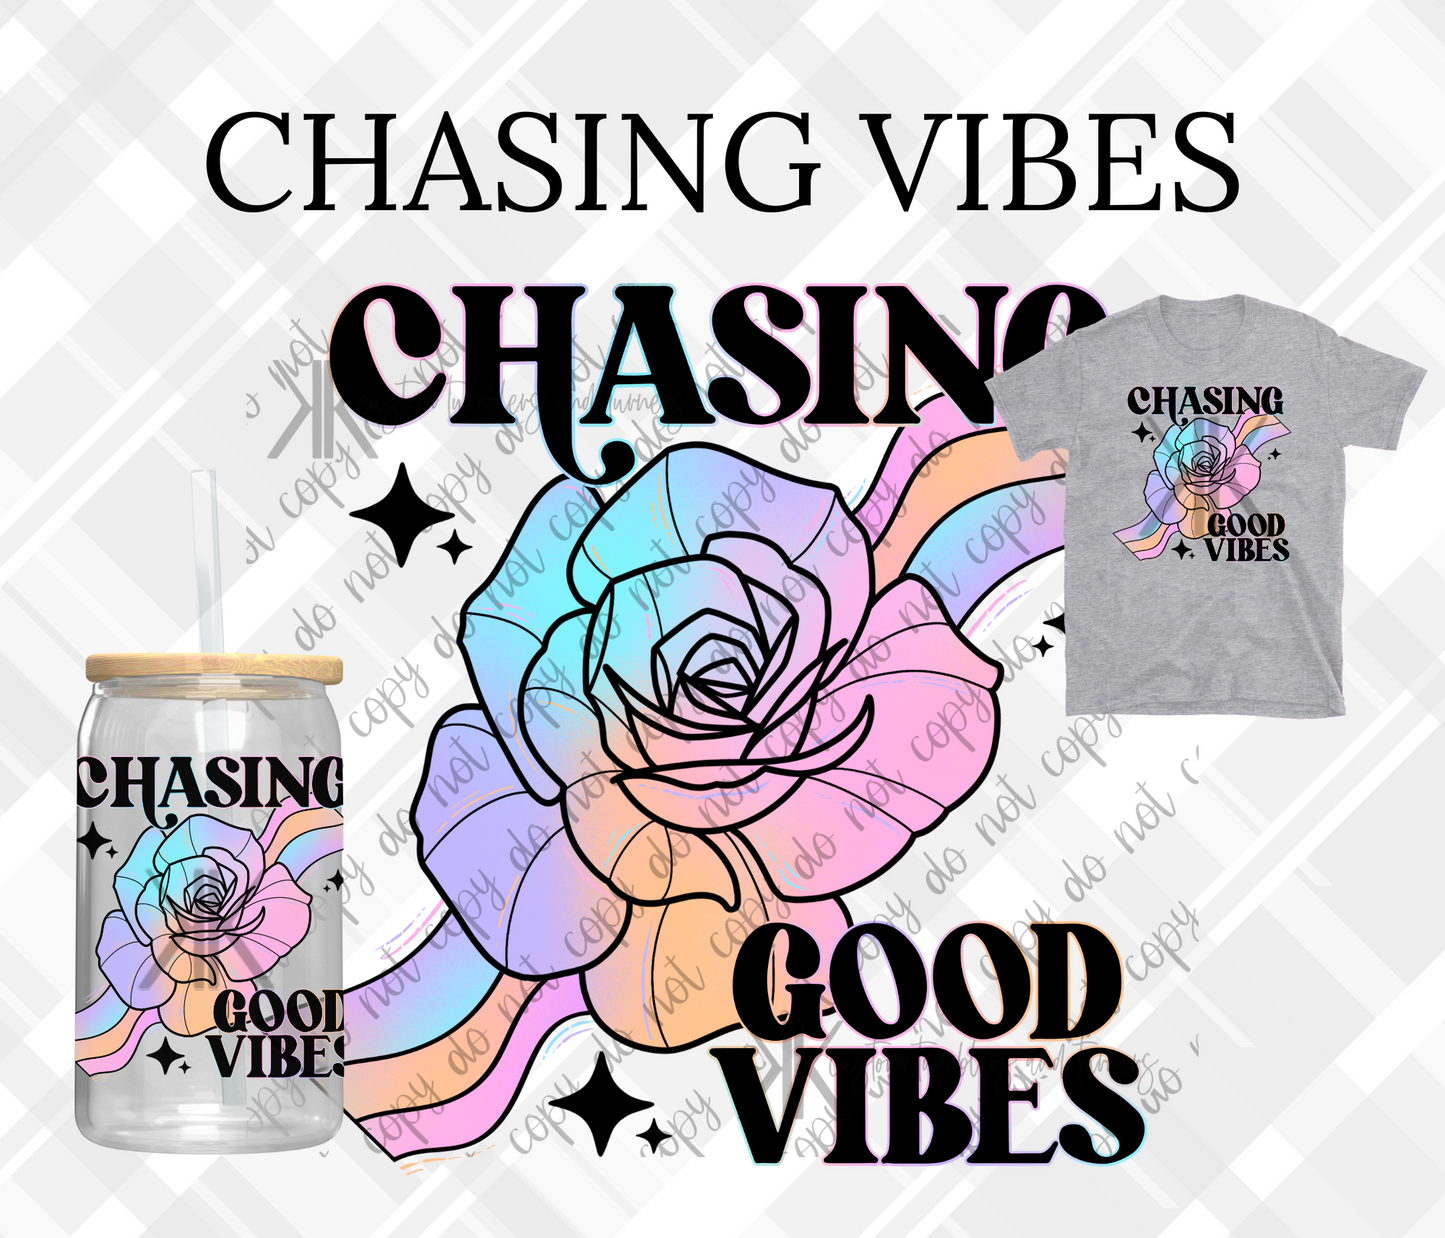 CHASING VIBES